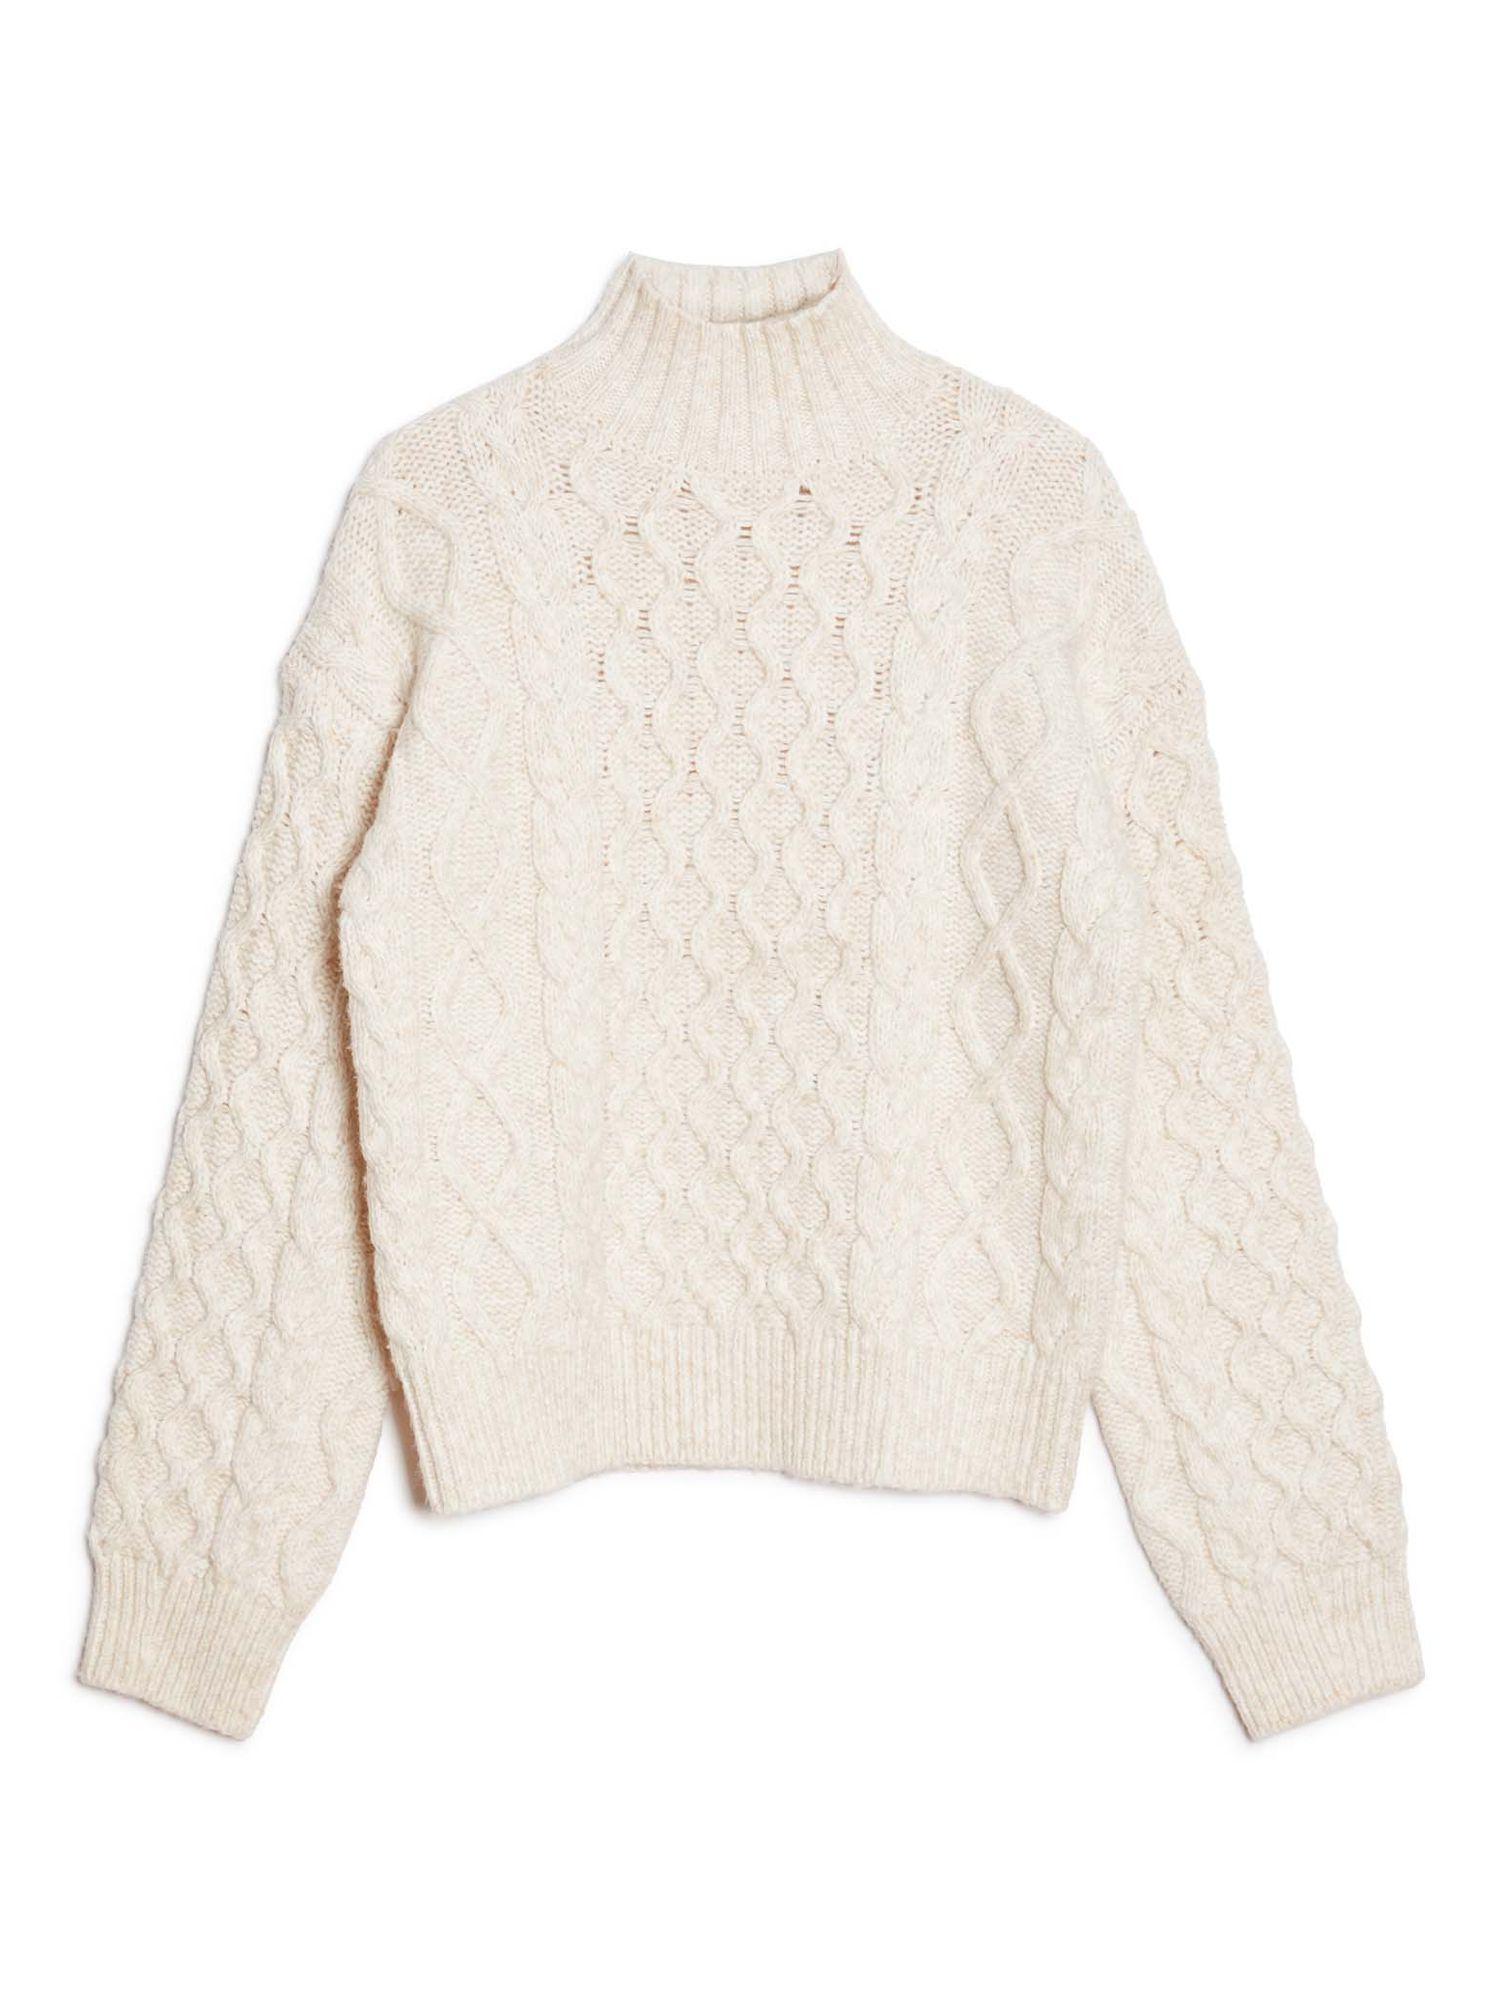 Albaray Cable Knit Turtle Neck Jumper, Cream at John Lewis & Partners